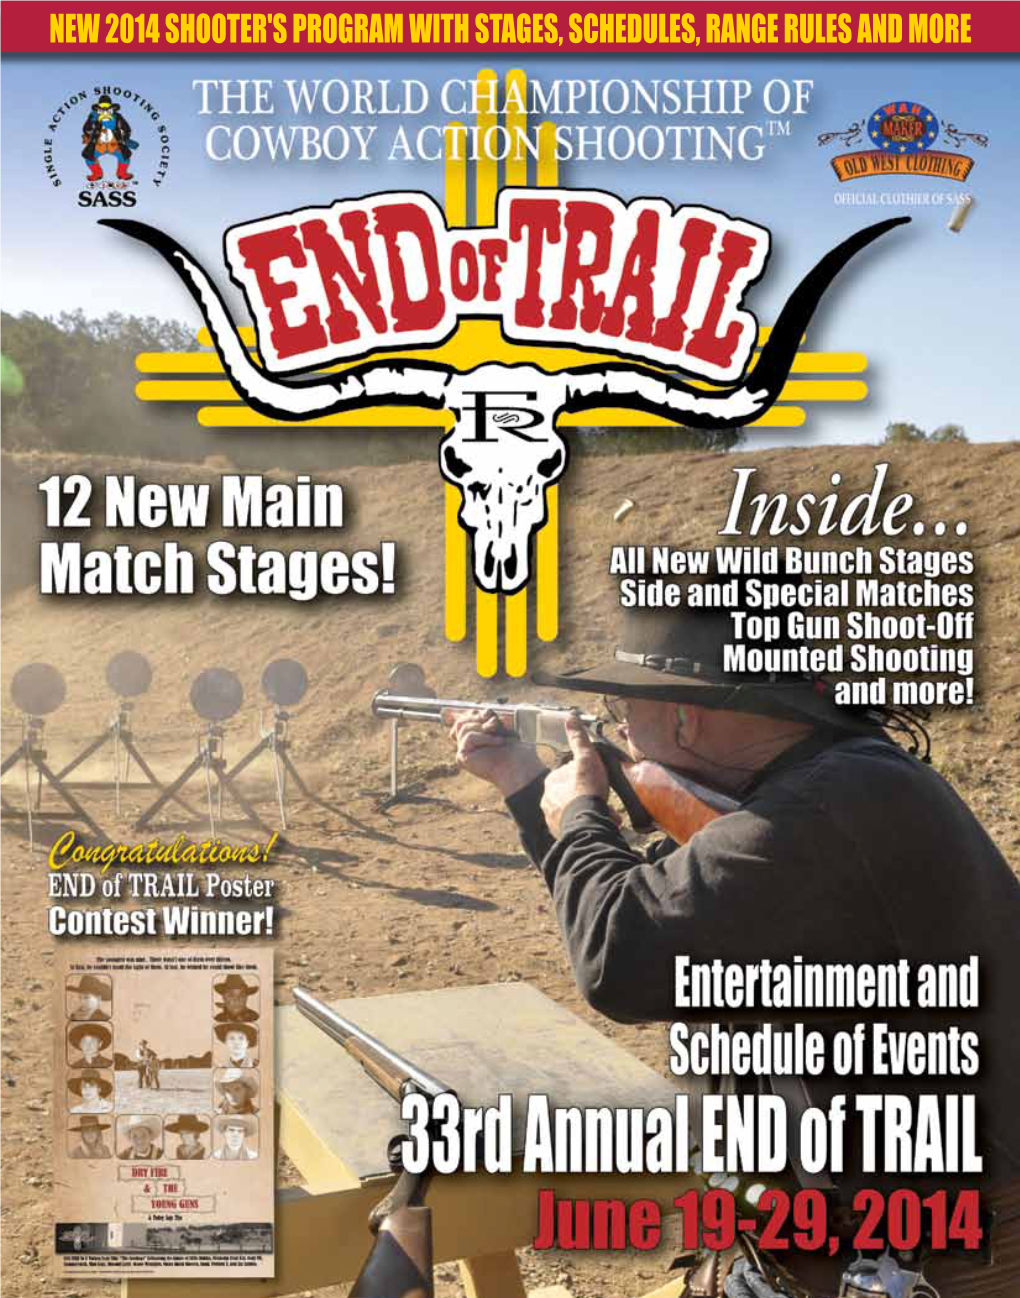 New 2014 Shooter's Program with Stages, Schedules, Range Rules and More